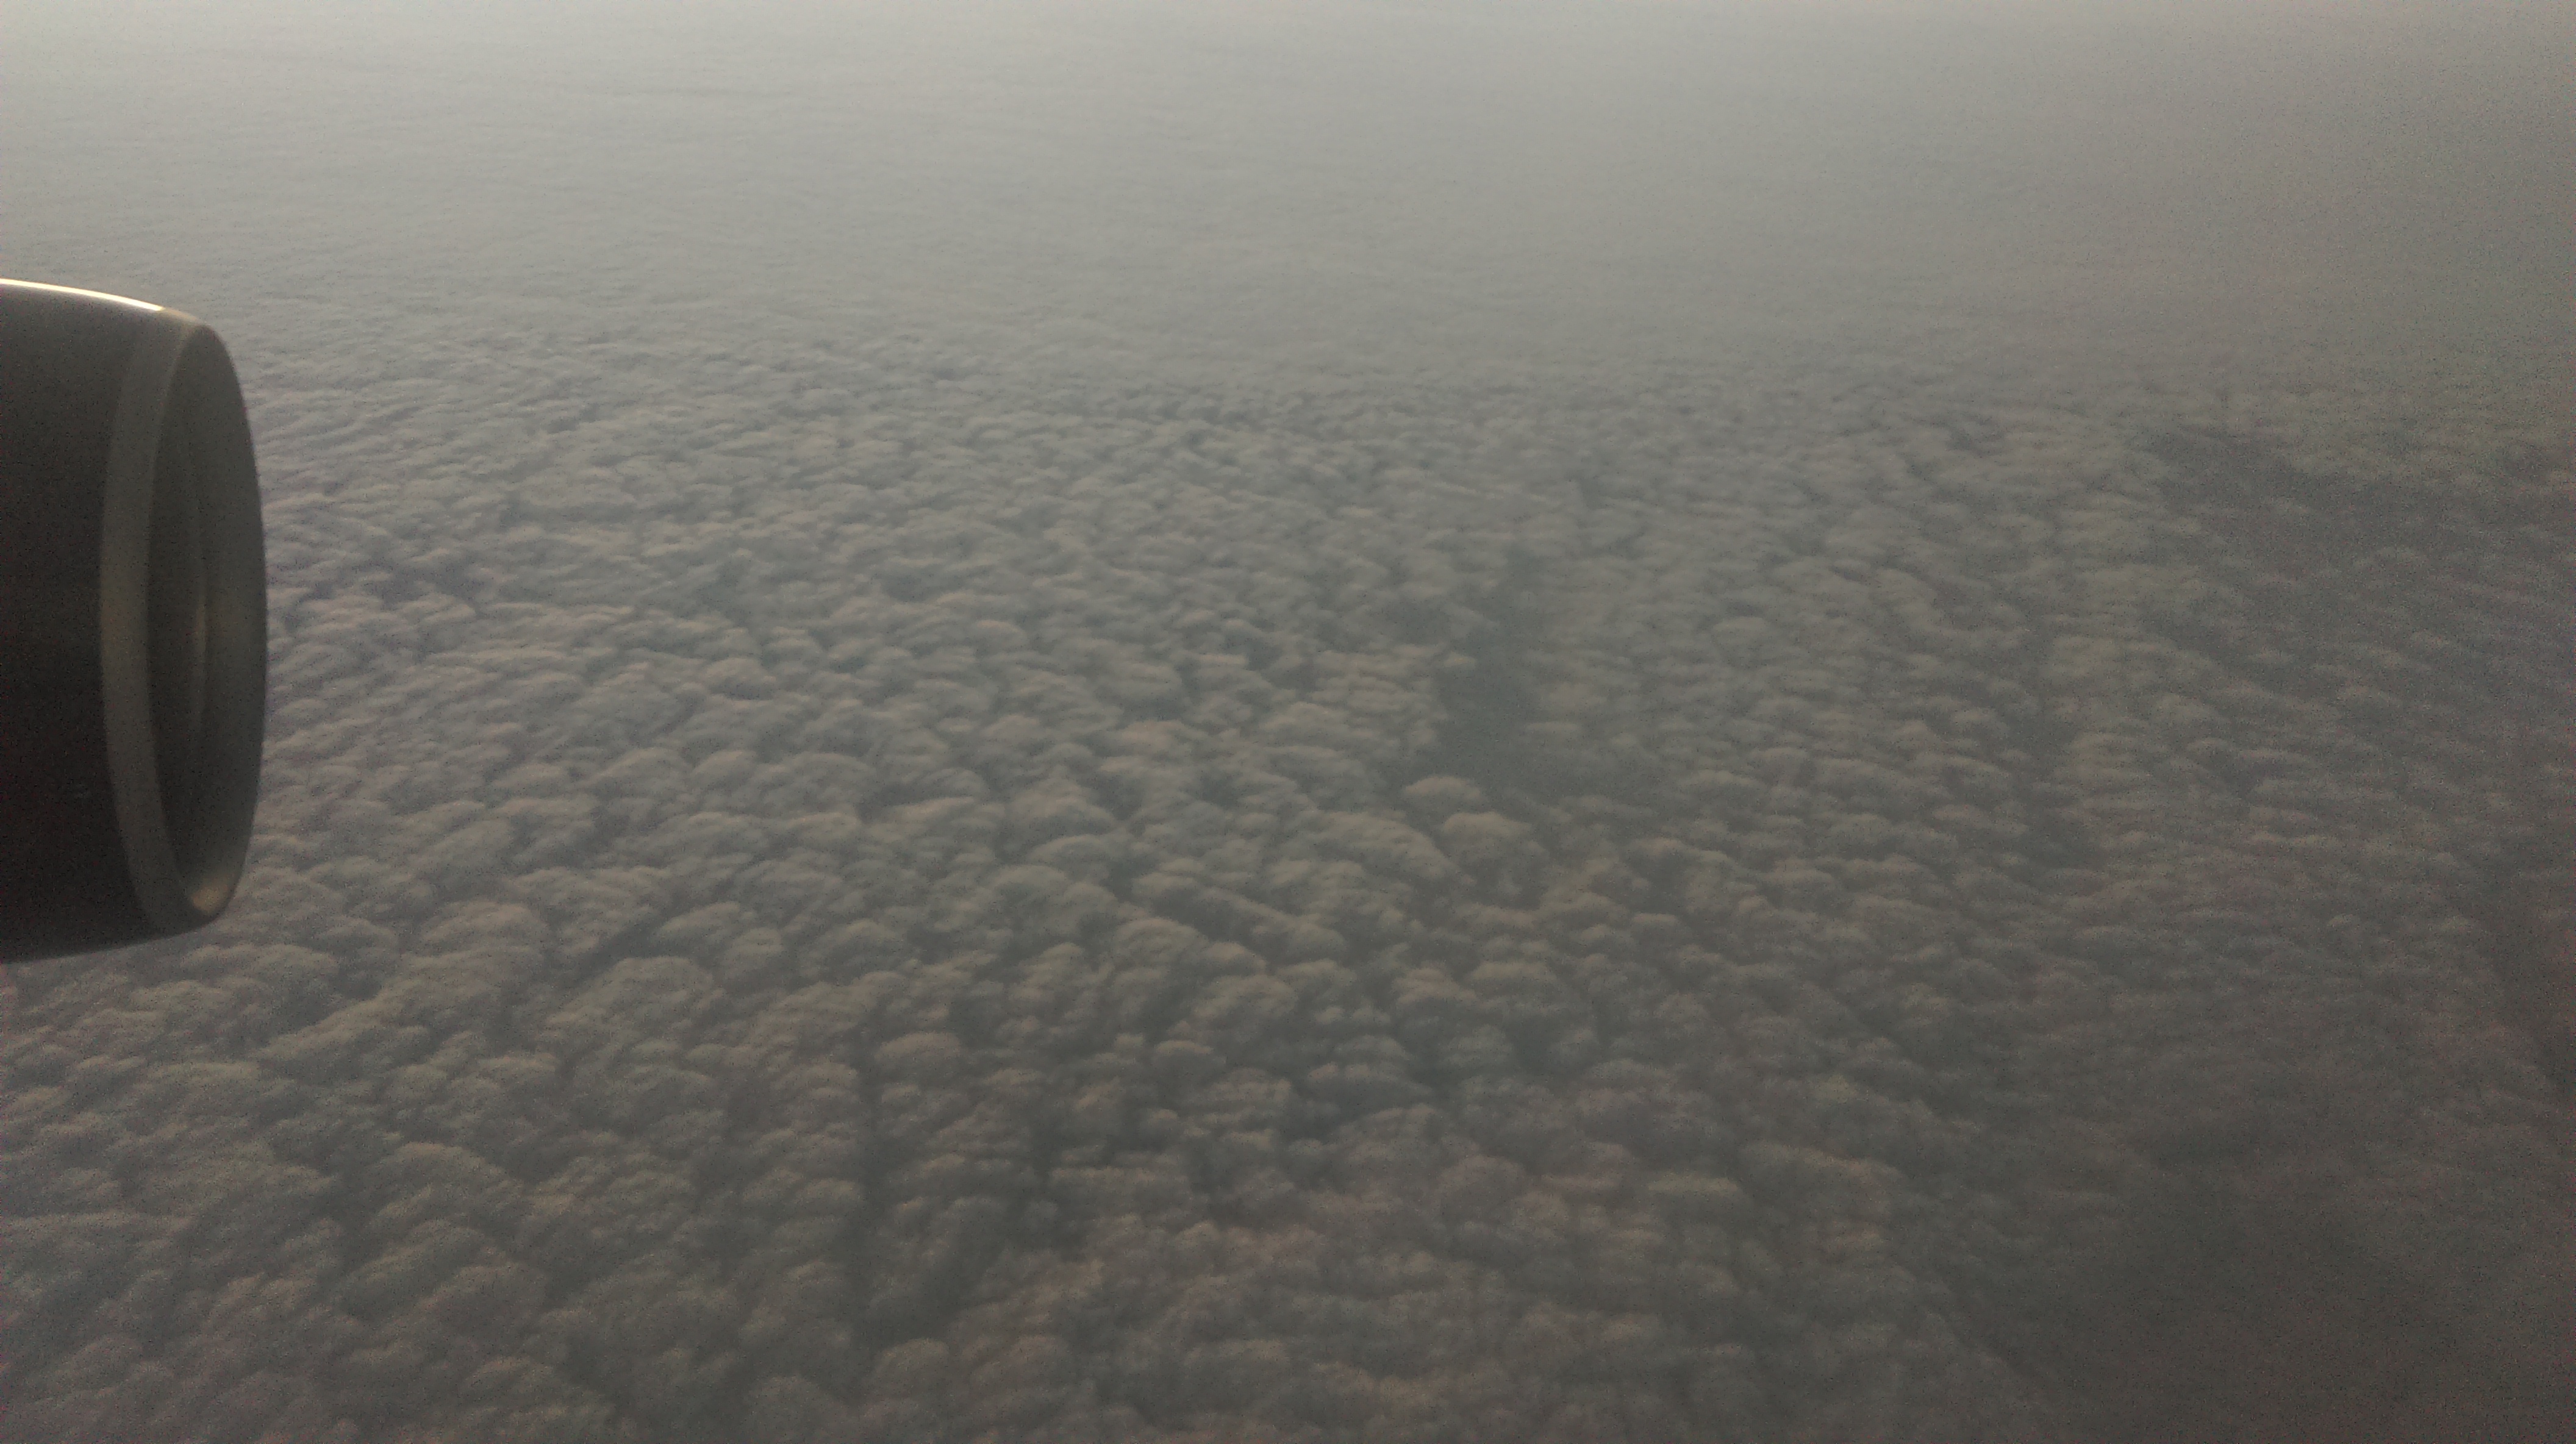 /zh-cn/posts/2014/08/on-the-plane/clouds.jpg